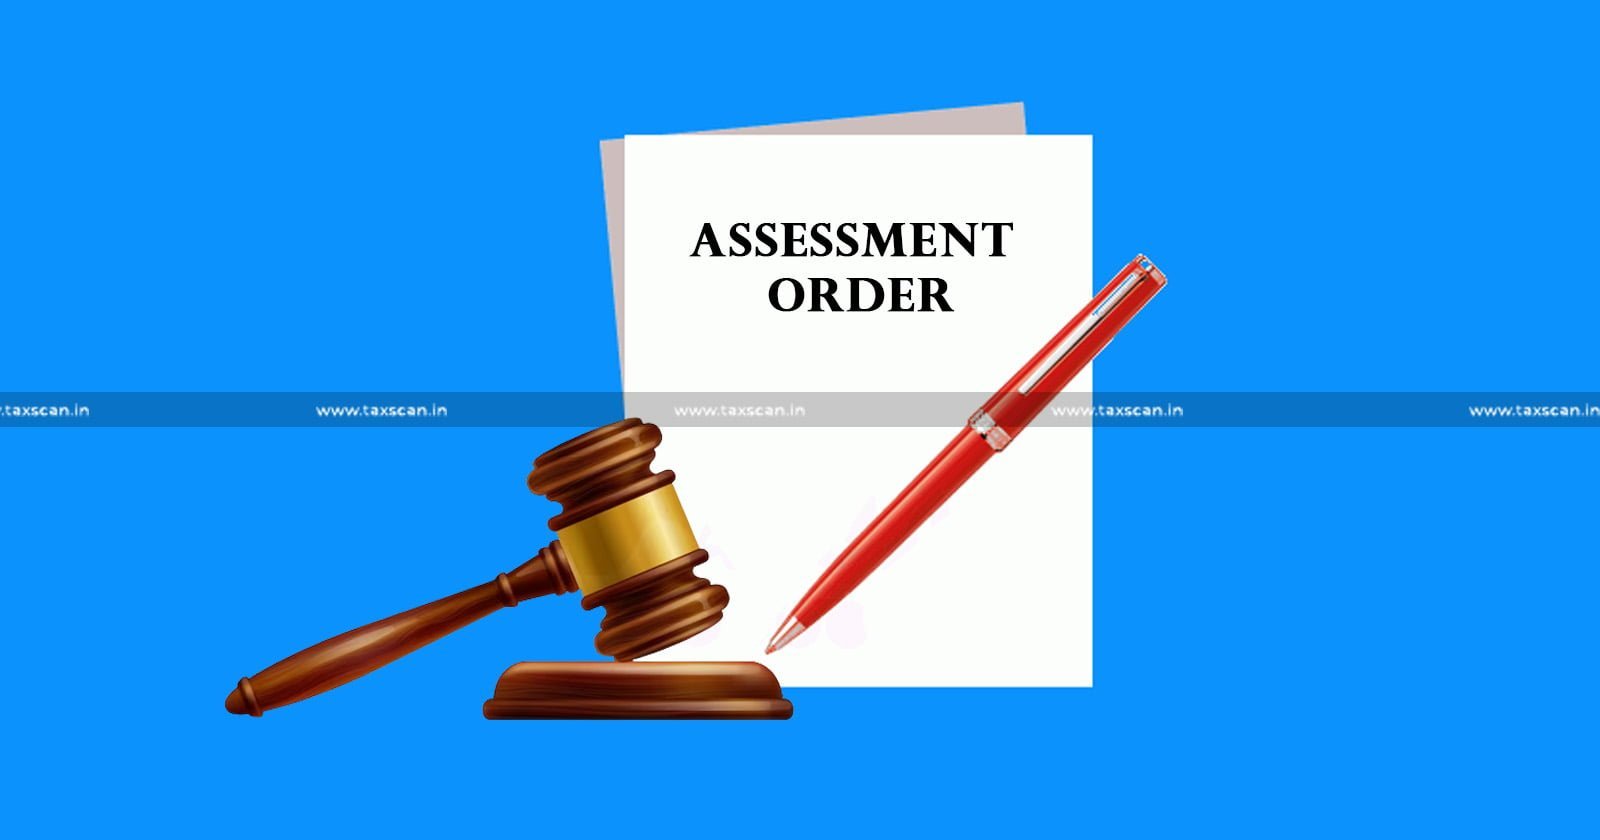 Assessment Order - PCIT - Revisionary Powers - IT Act - Income Tax - AO - Sufficient Enquiry - ITAT - taxscan